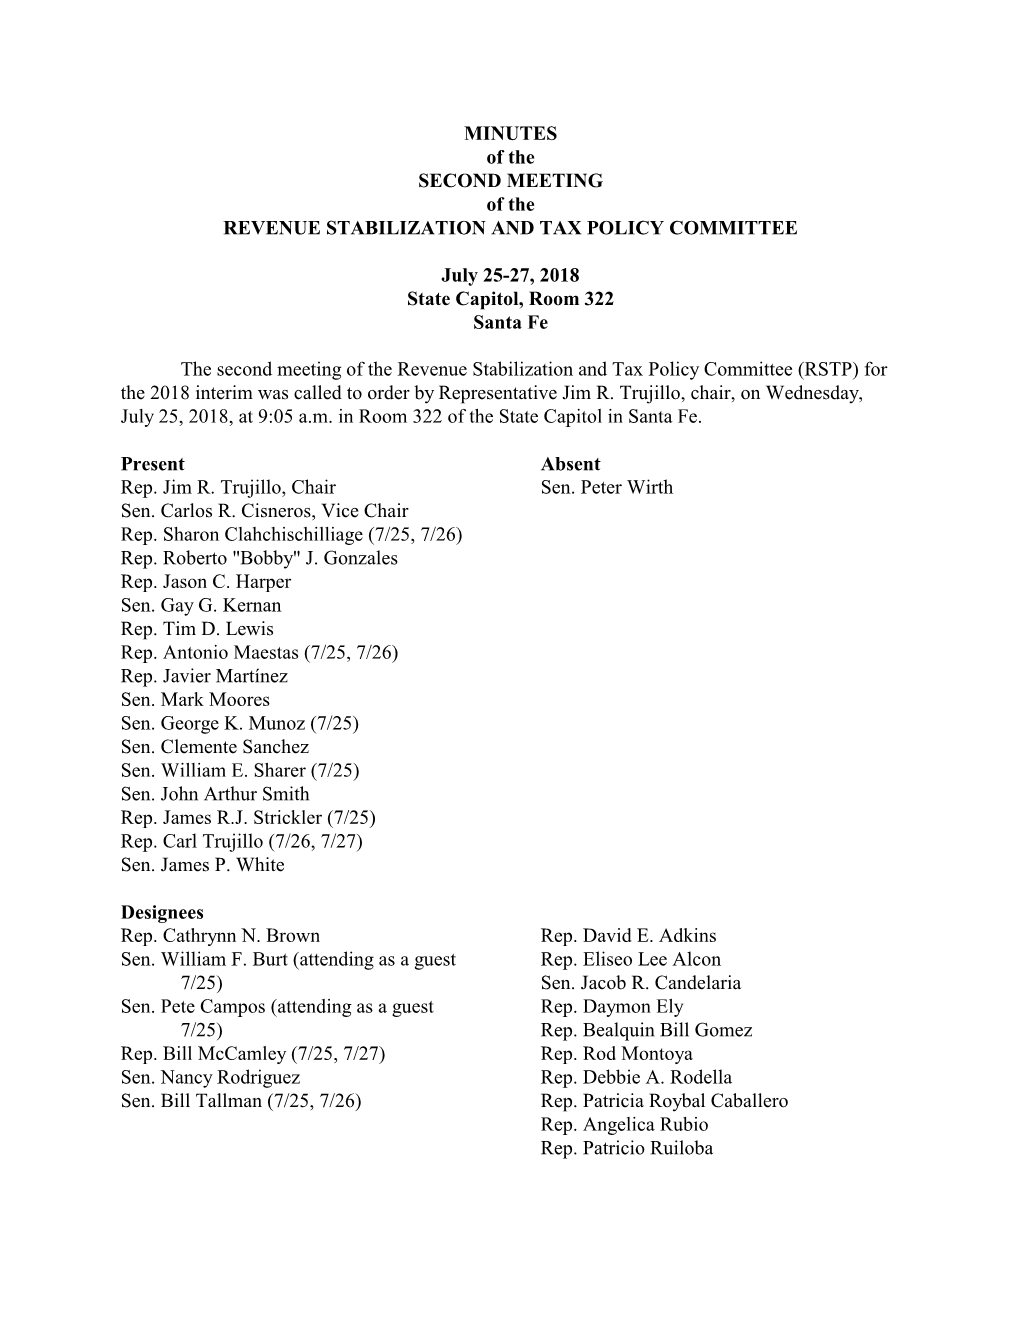 MINUTES of the SECOND MEETING of the REVENUE STABILIZATION and TAX POLICY COMMITTEE